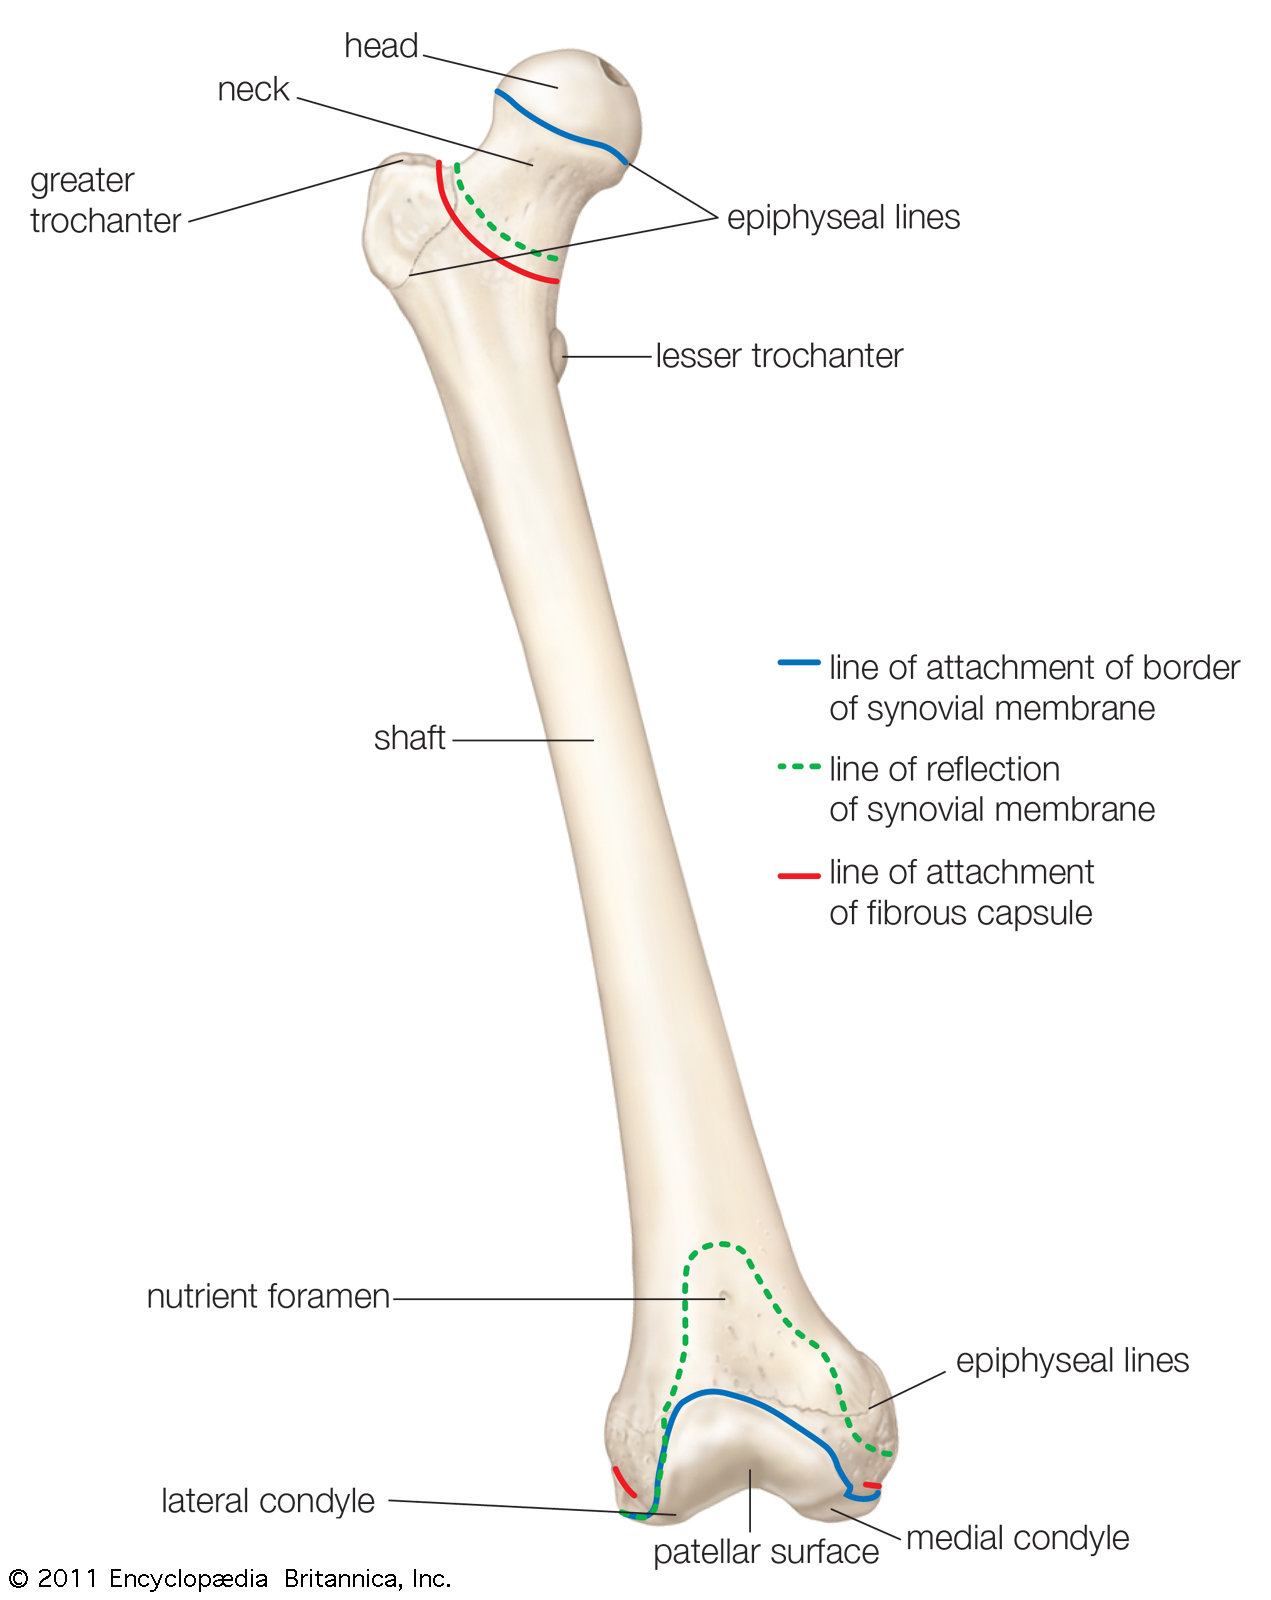 Image result for identify and explain the function of each component in the labeled long bone